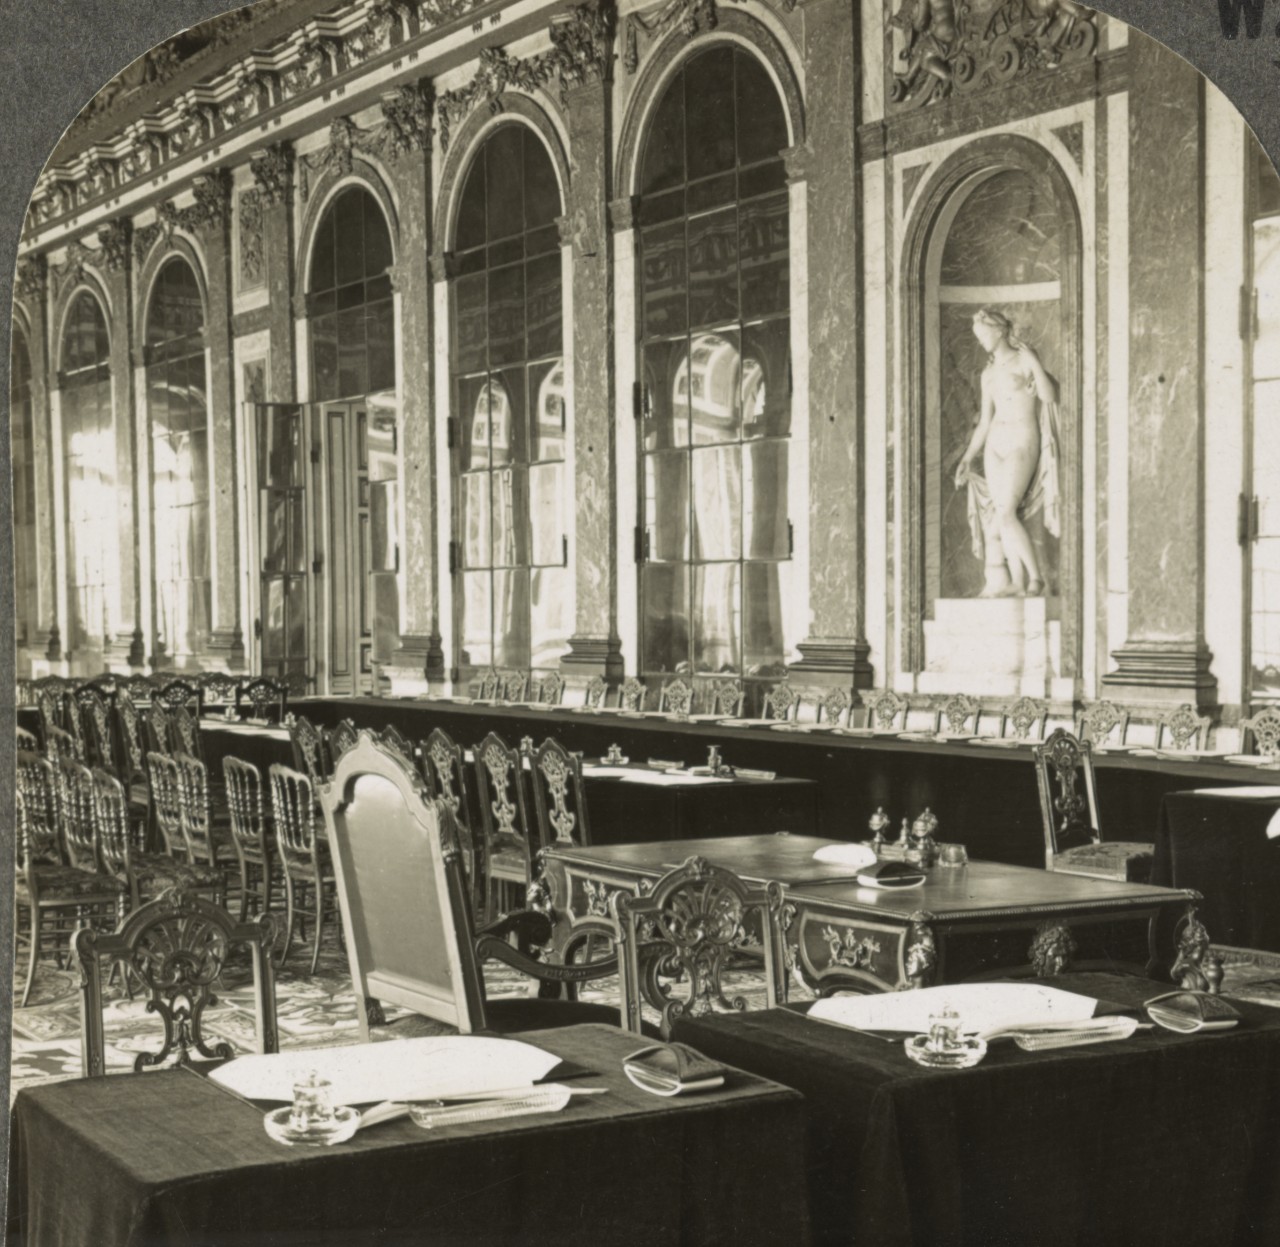 <p>LC-DIG-stereo-1s04278: Galerie des Glaces, showing table where peace treaty was signed, Versailles, France on June 28, 1919</p>